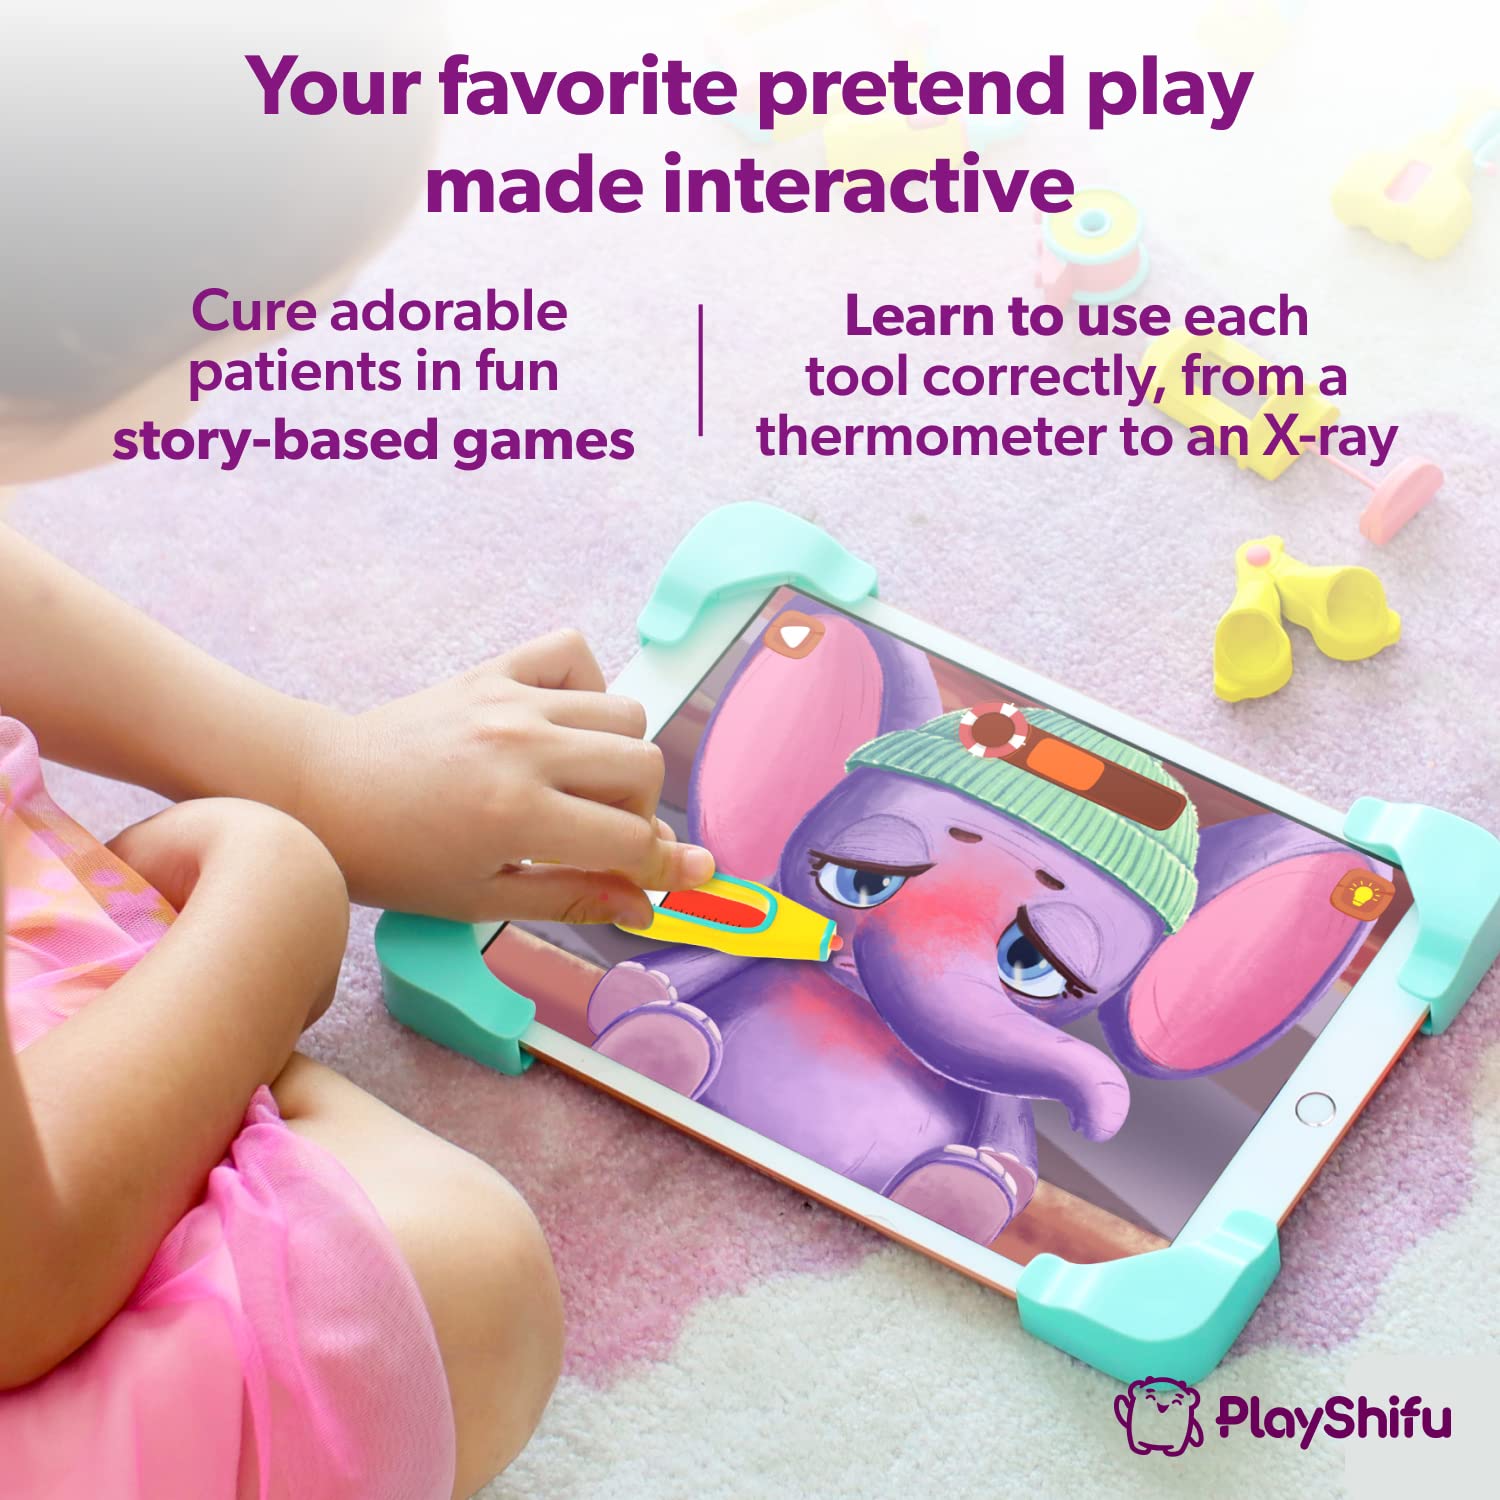 PlayShifu STEM Toys for Kids - Tacto Doctor (Interactive Kit + App) - Pretend Play with Real STEM Learning